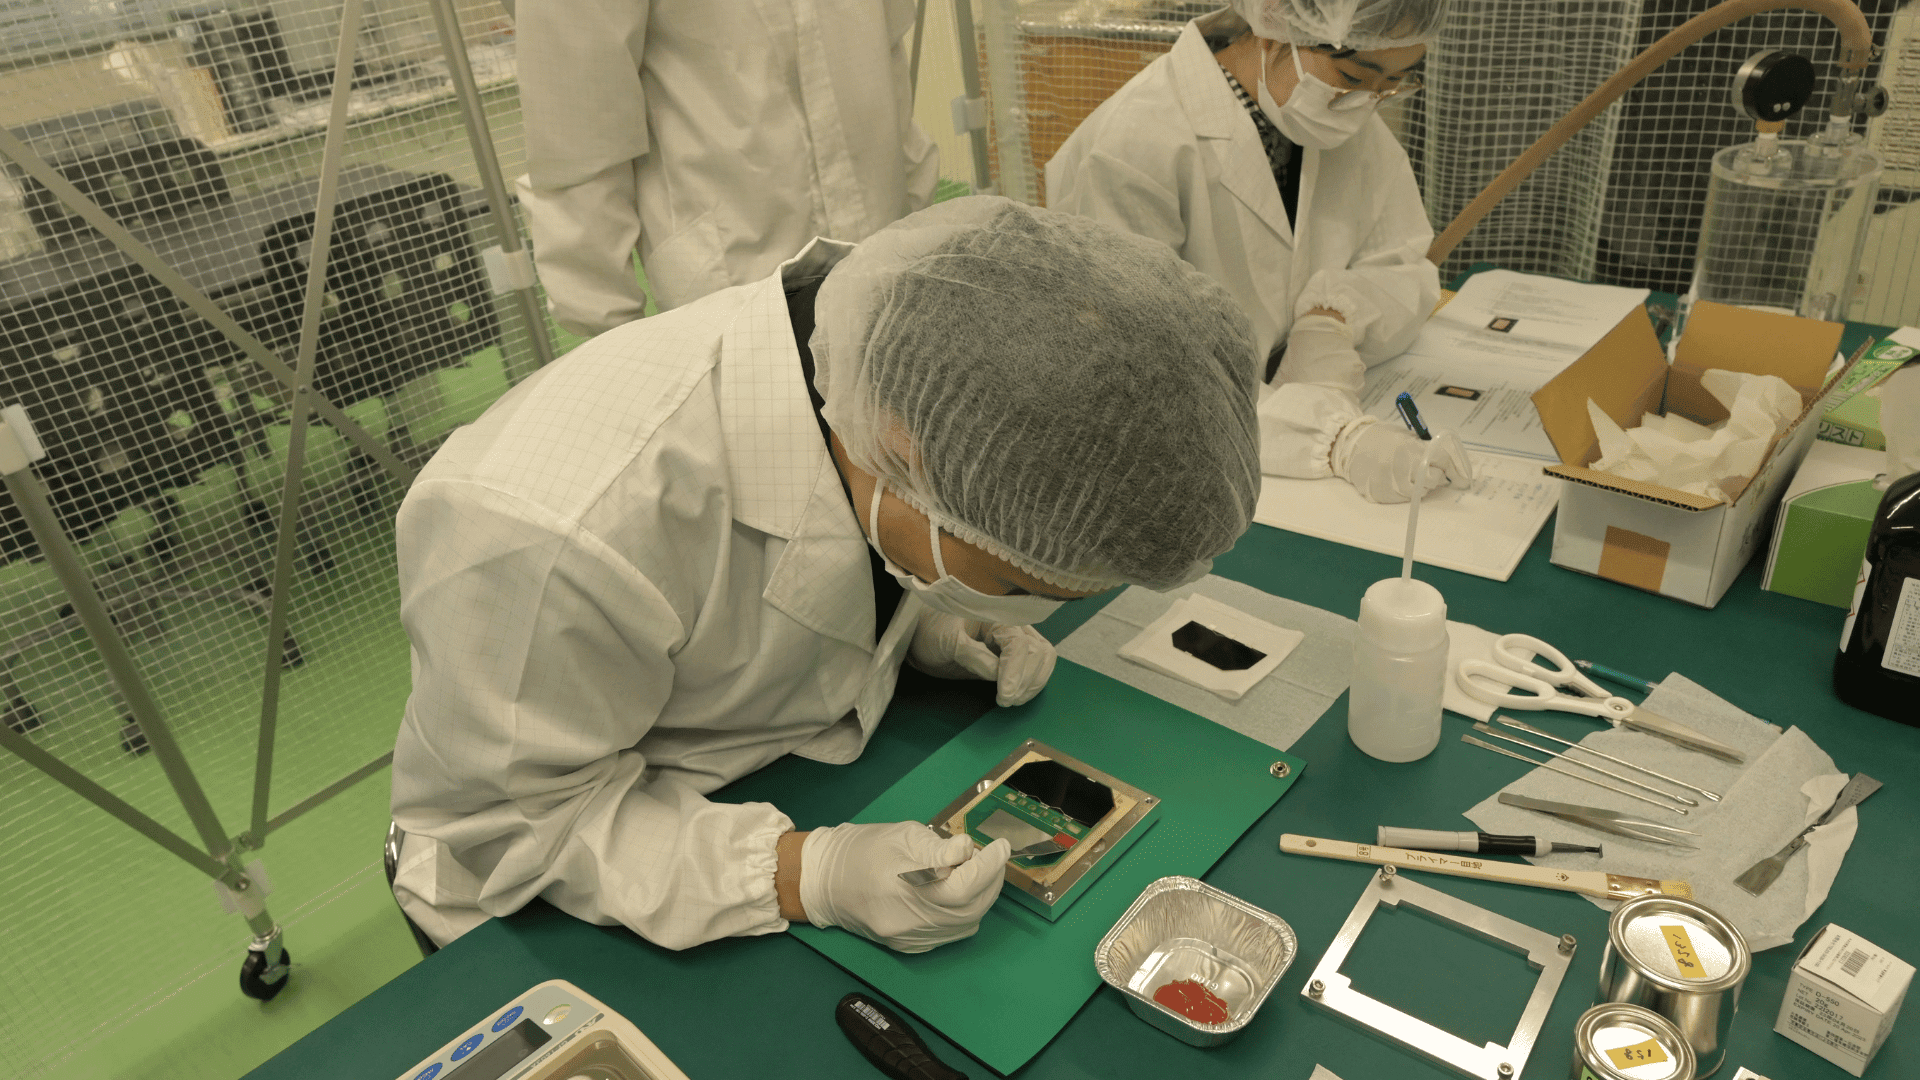 Engineers at Kyoto University are building a wooden satellite that will be launched into space in a joint mission with JAXA and NASA